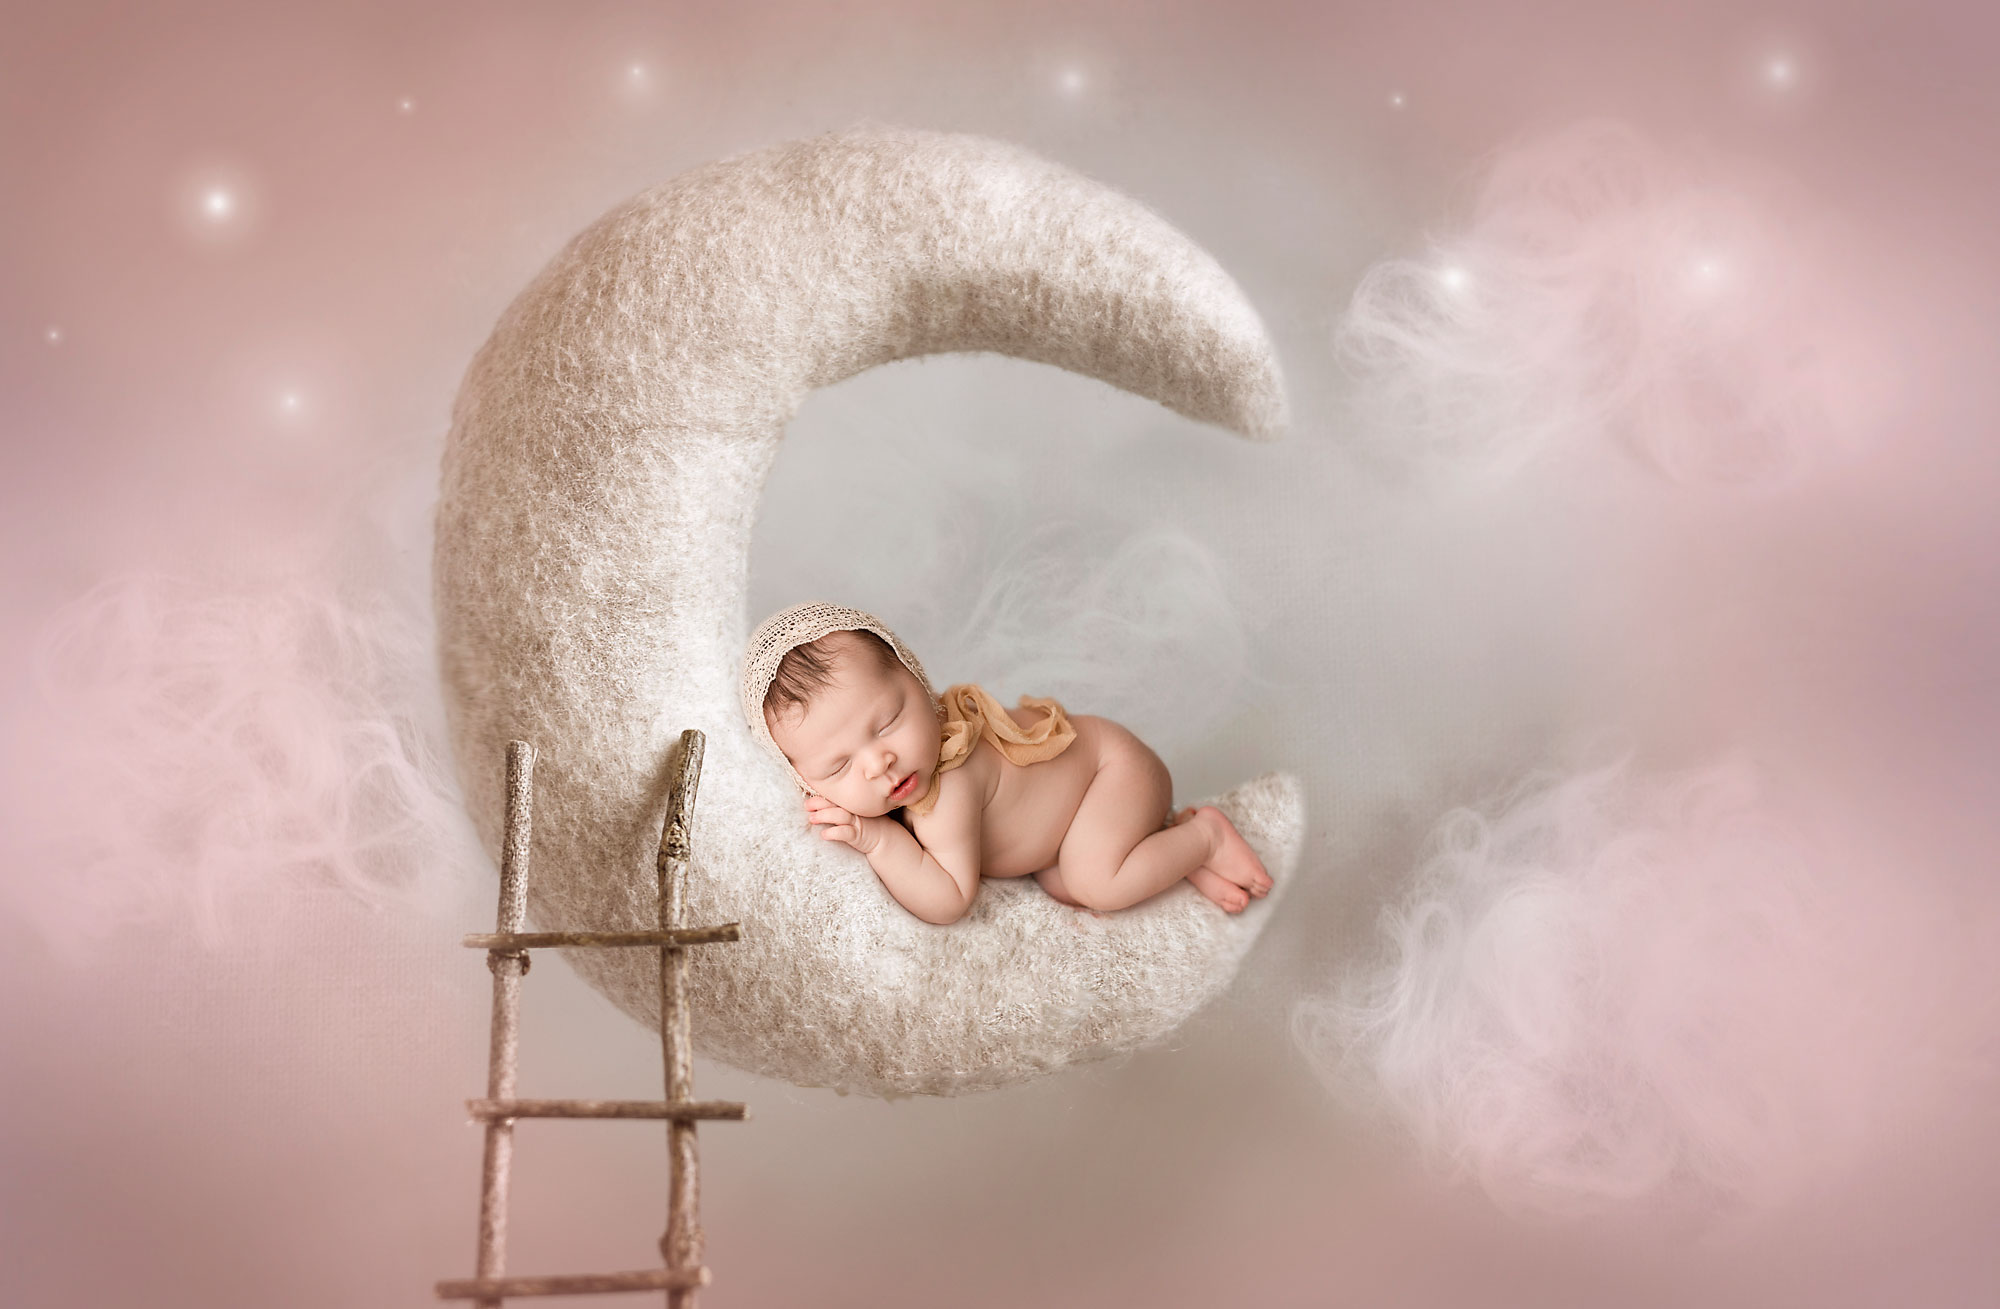 union county nj newborn photographer, baby asleep on moon prop with ladder and pink sky backdrop